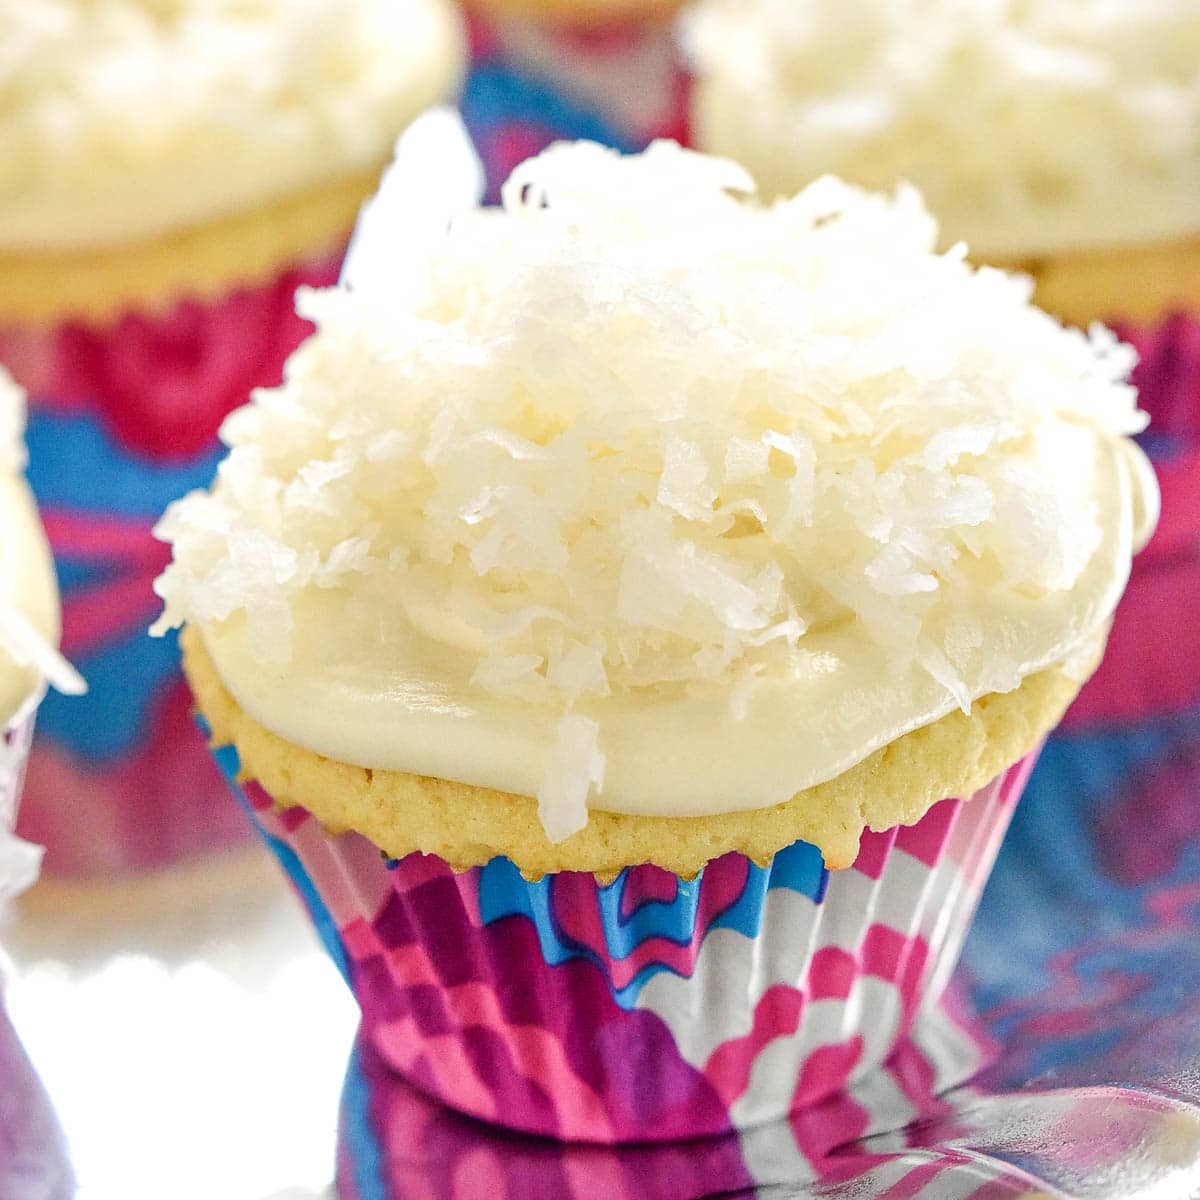 Coconut Cupcakes with cream cheese frosting and a garnish of flaked coconut.